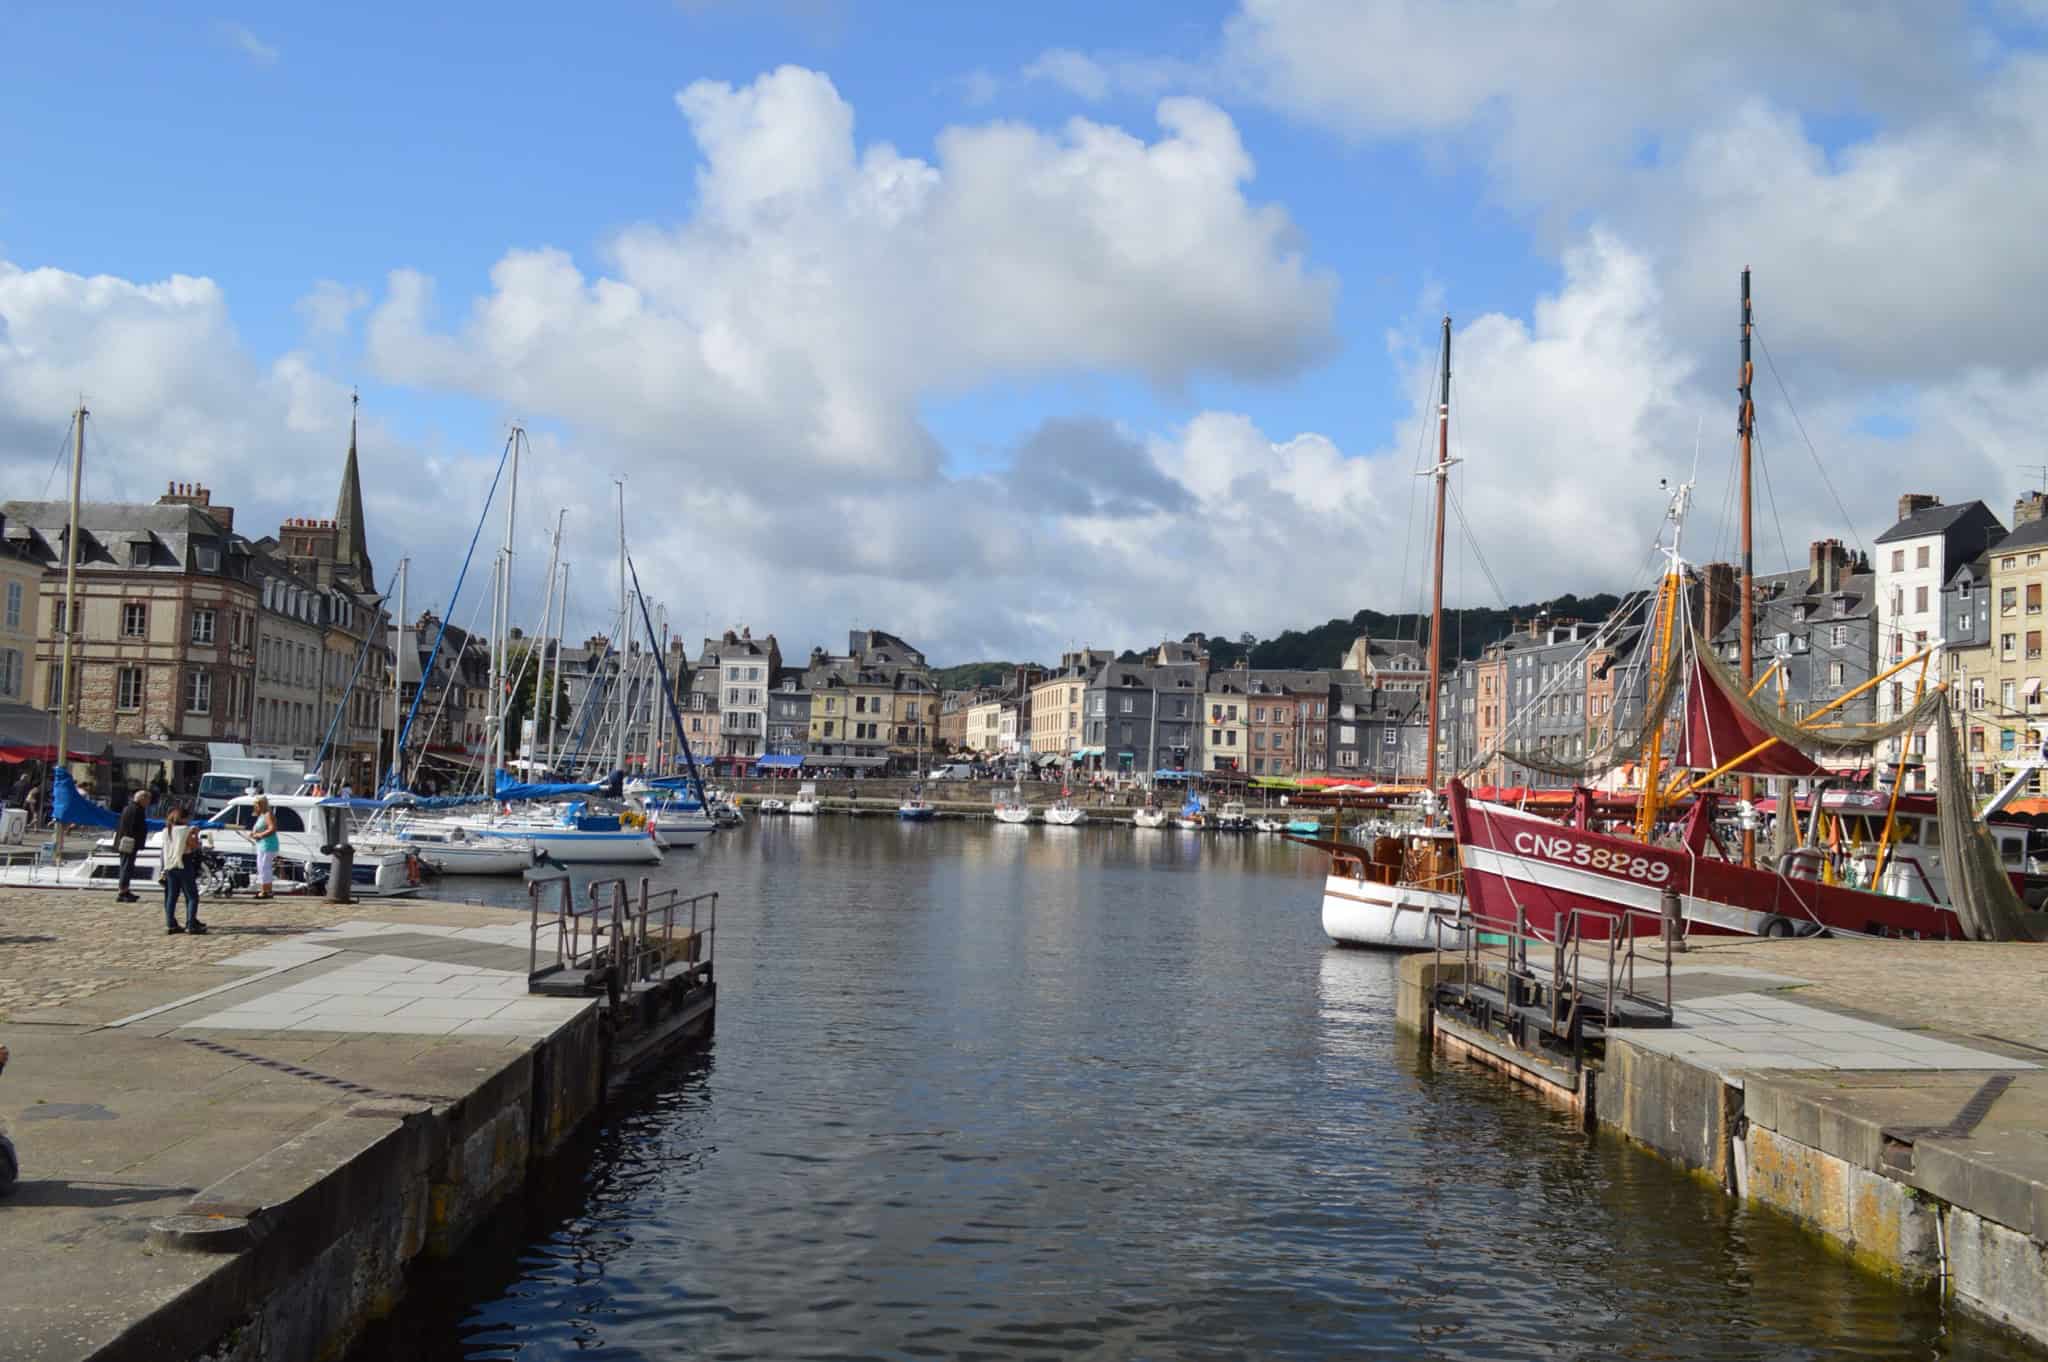 Honfleur, the mouth of the Seine